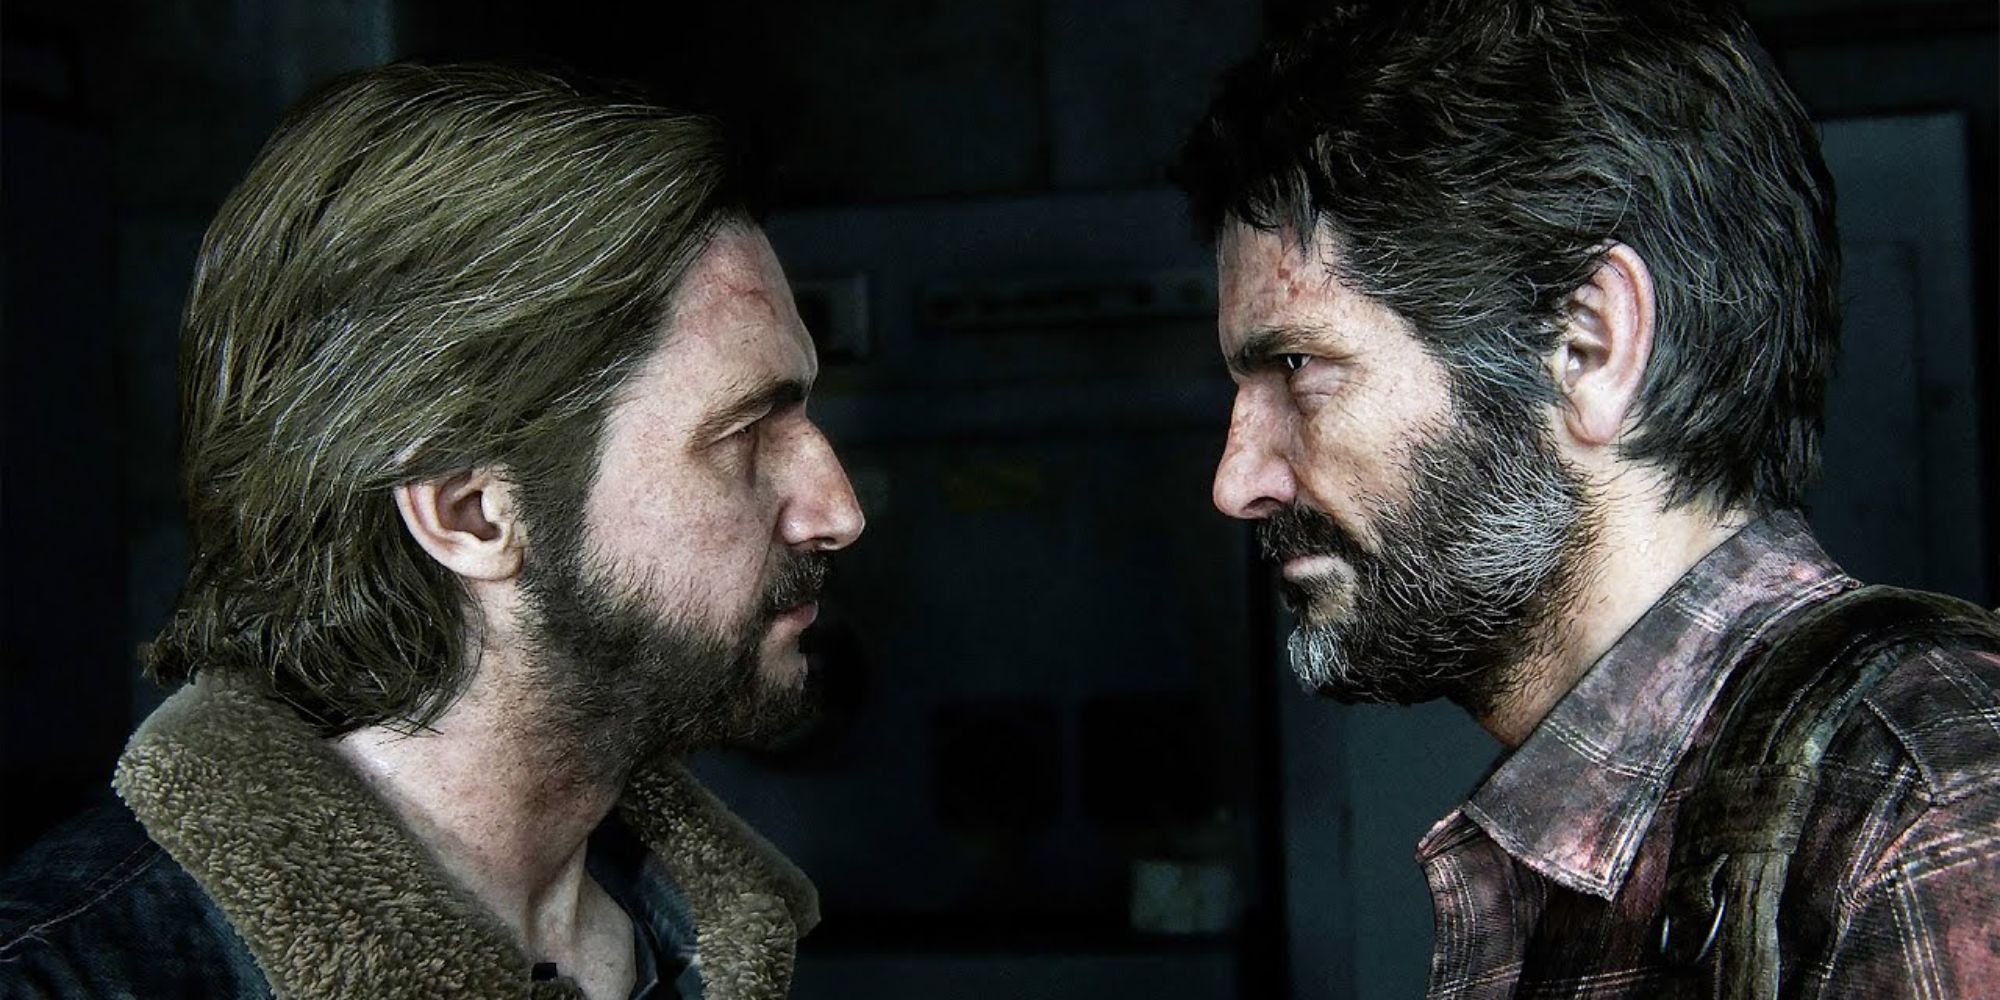 The Last of Us's brothers, Joel and Tommy, face to face.